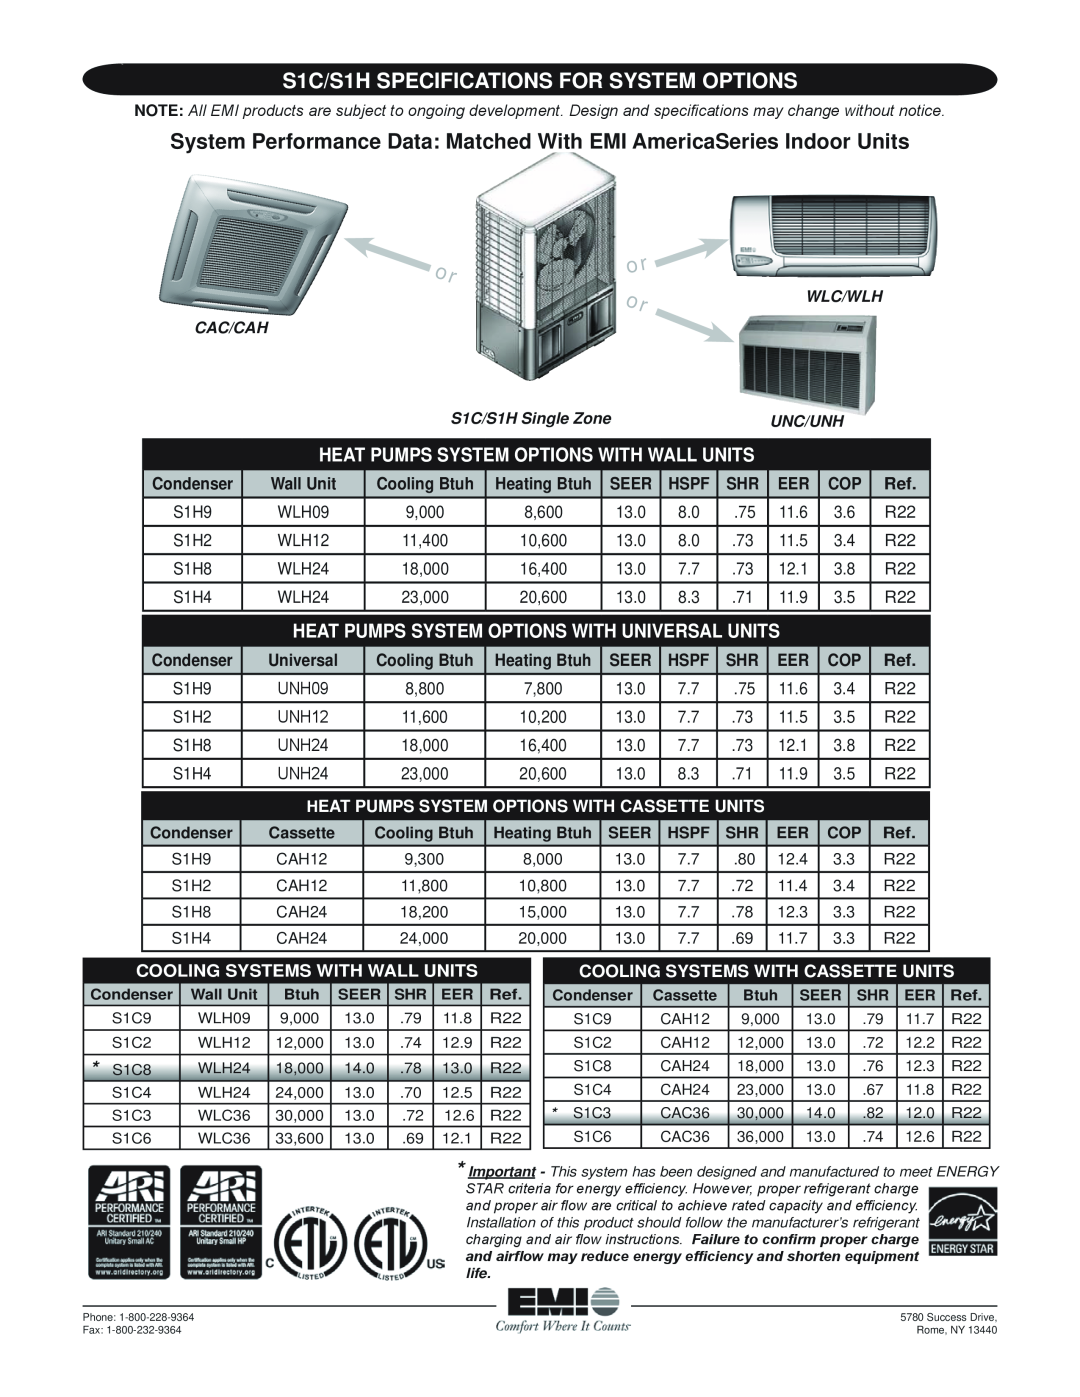 EMI S1C 30-36, S1C 9-24 S1C/S1H Specifications for System options, Heat pumps System Options with Wall Units, or or 